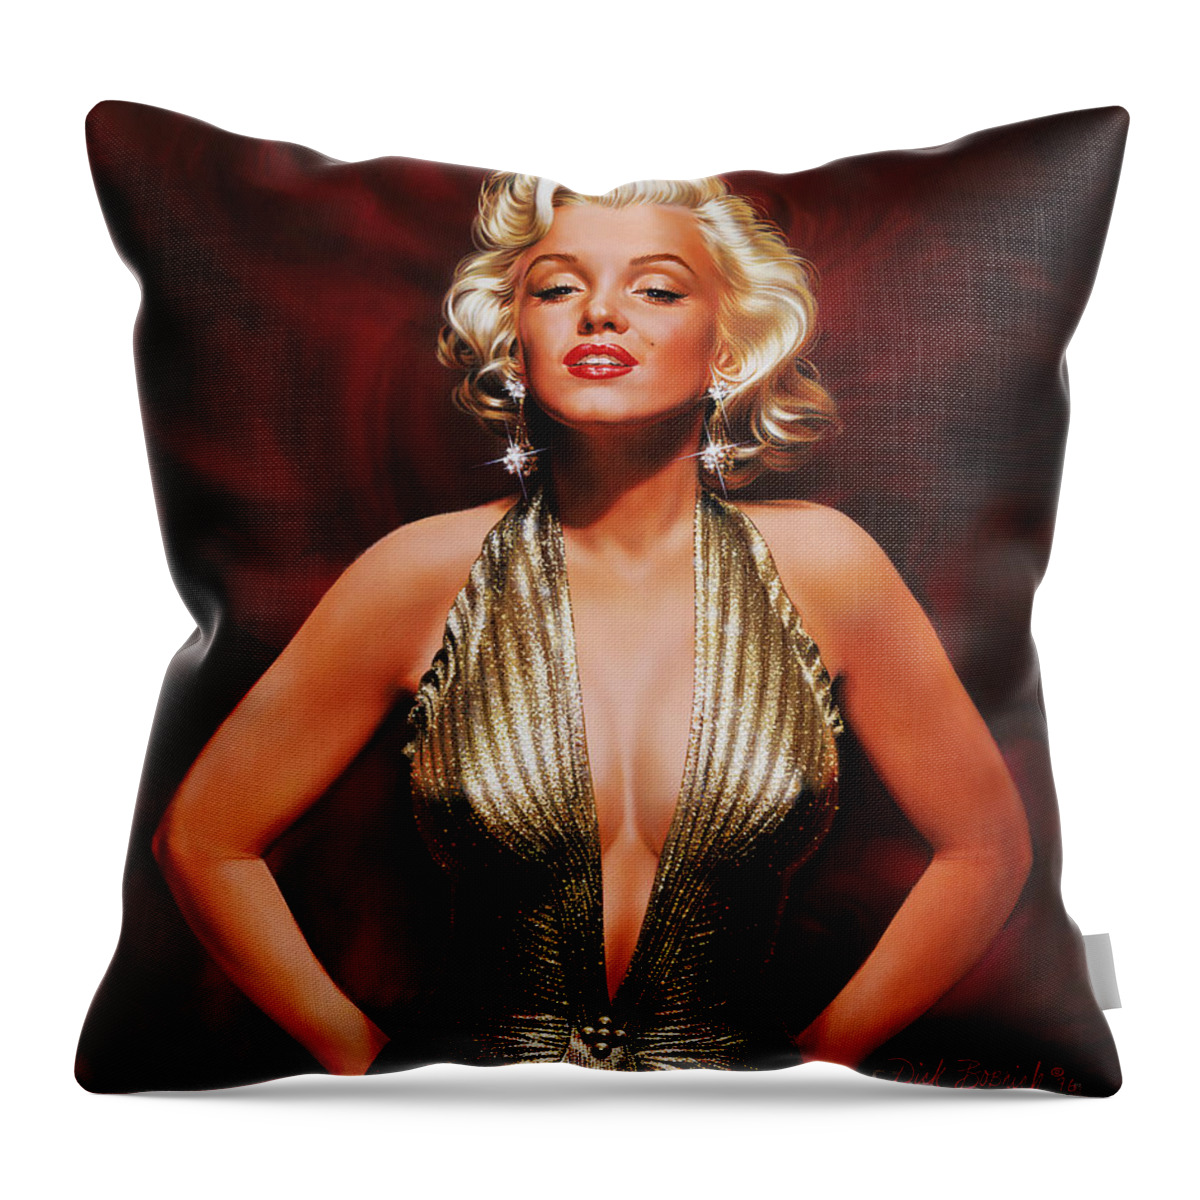 Portrait Throw Pillow featuring the painting Marilyn Monroe by Dick Bobnick